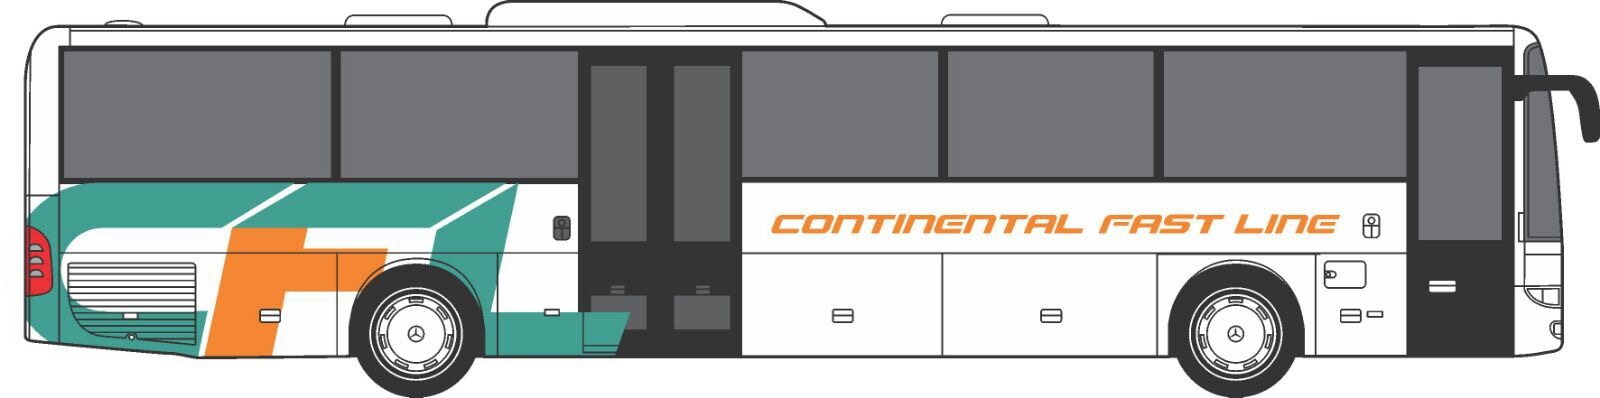 CONTINENTAL FAST LINE S.R.L. undefined: foto 2